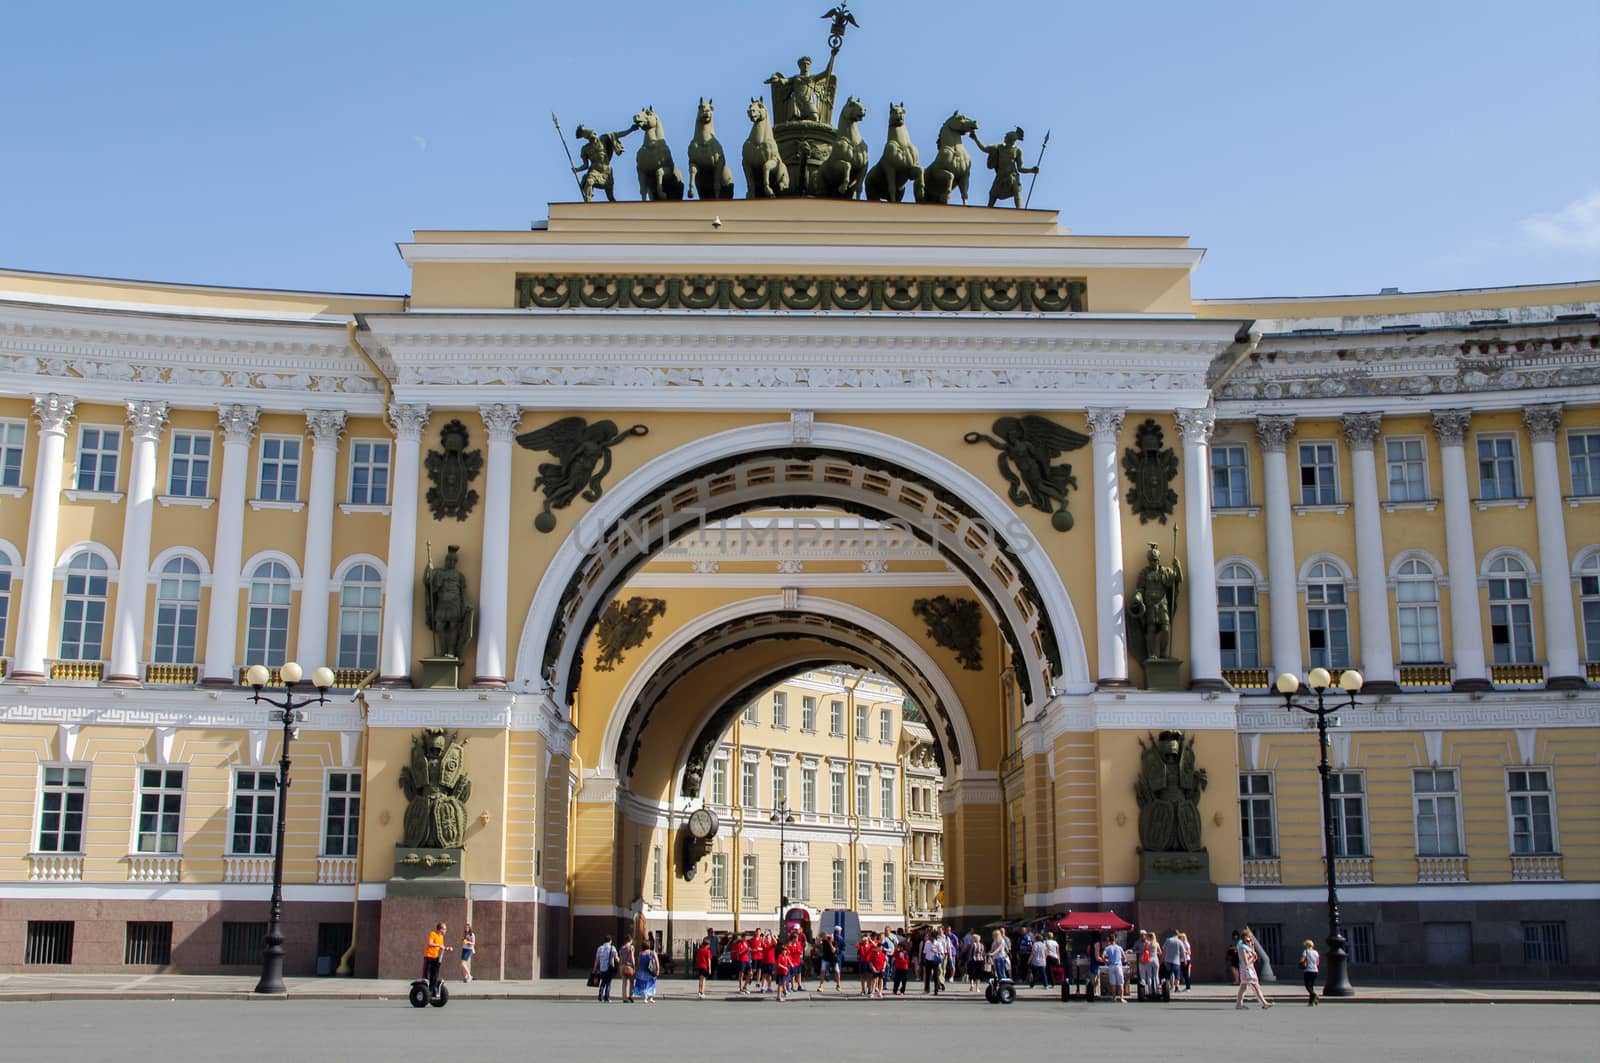 SAINT PETERSBURG - JUNE 05, 2014: Chariot of Glory on the Triumphal Arch General Staff Palace Square. by evolutionnow